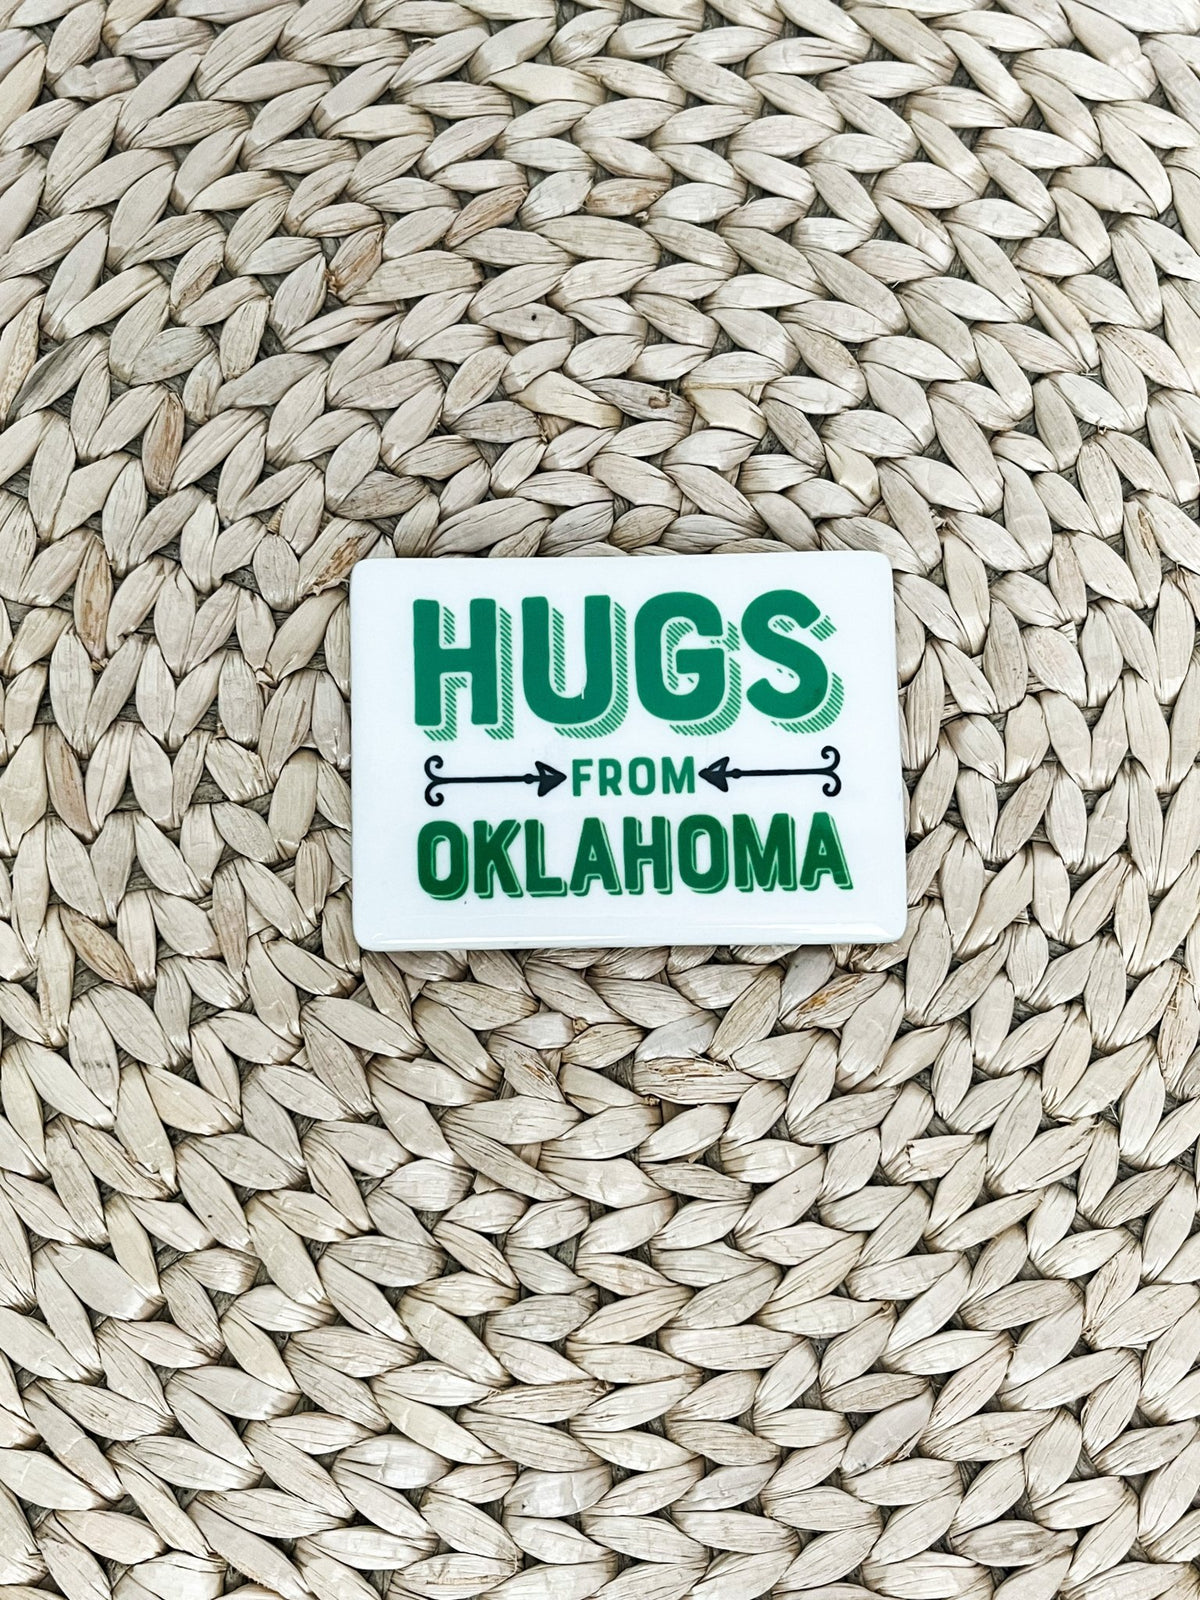 Hugs from Oklahoma magnet - Trendy Gifts at Lush Fashion Lounge Boutique in Oklahoma City